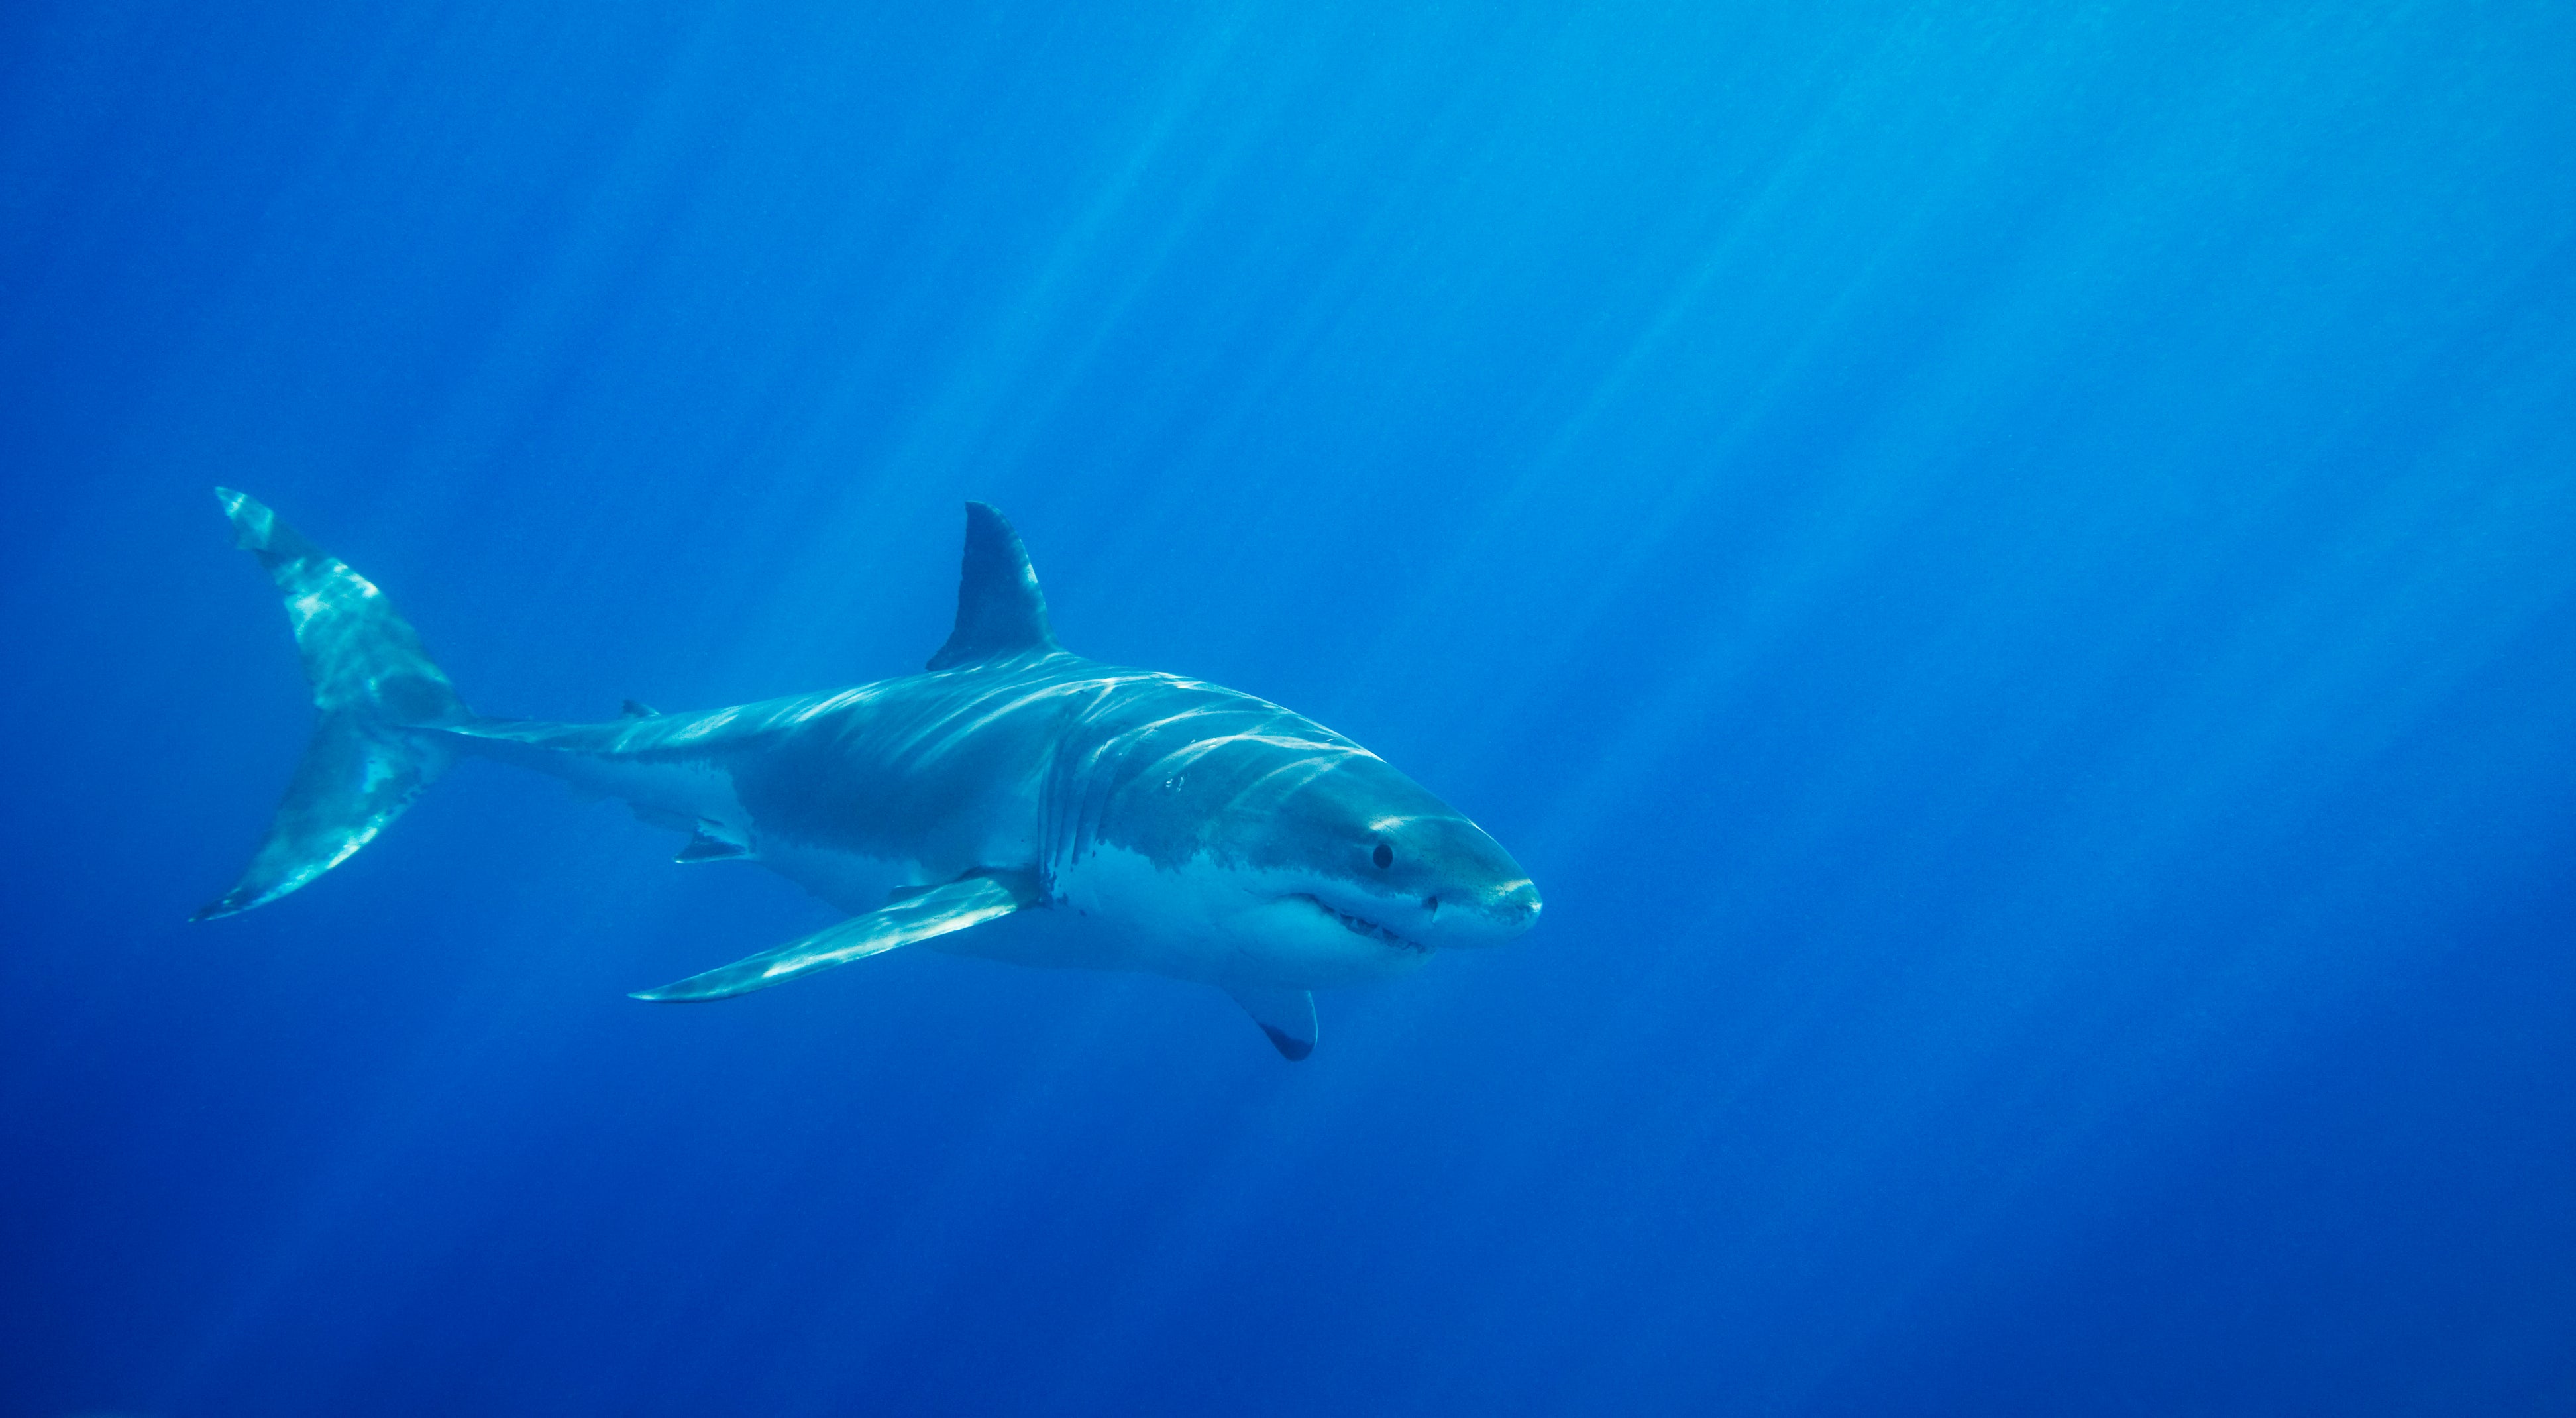 A surfer had an encounter with a great white in the same area several years ago